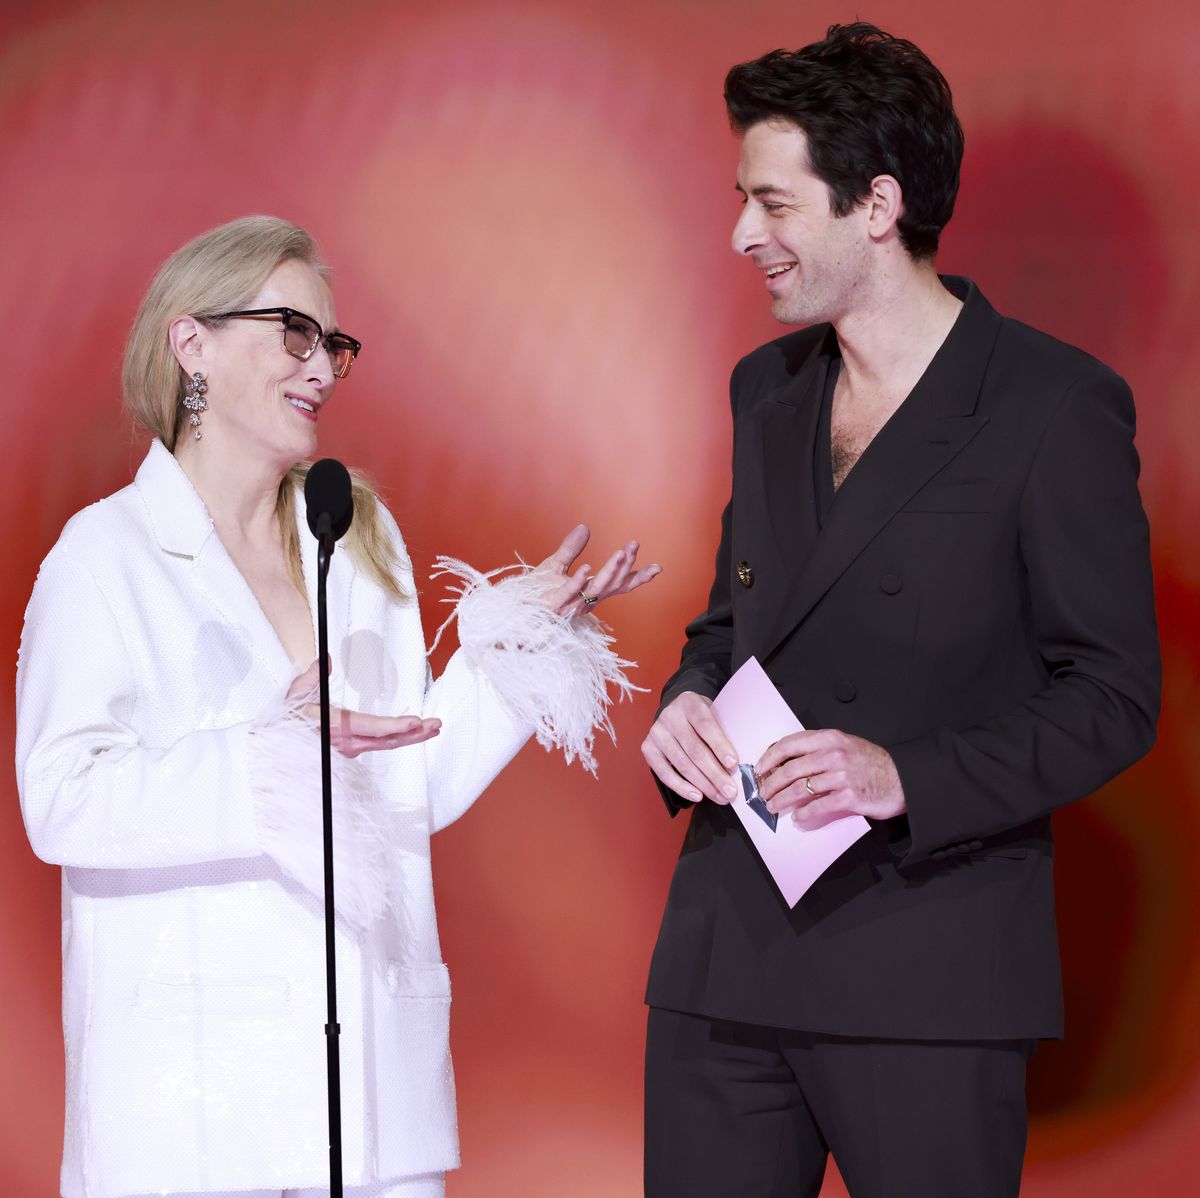 los angeles february 4 meryl streep and mark ronson present the award for record of the year at the 66th annual grammy awards, airing live from cryptocom arena in los angeles, california, sunday, feb 4 800 1130 pm, live et500 830 pm, live pt on the cbs television network photo by sonja flemmingcbs via getty images local caption meryl streepmark ronson